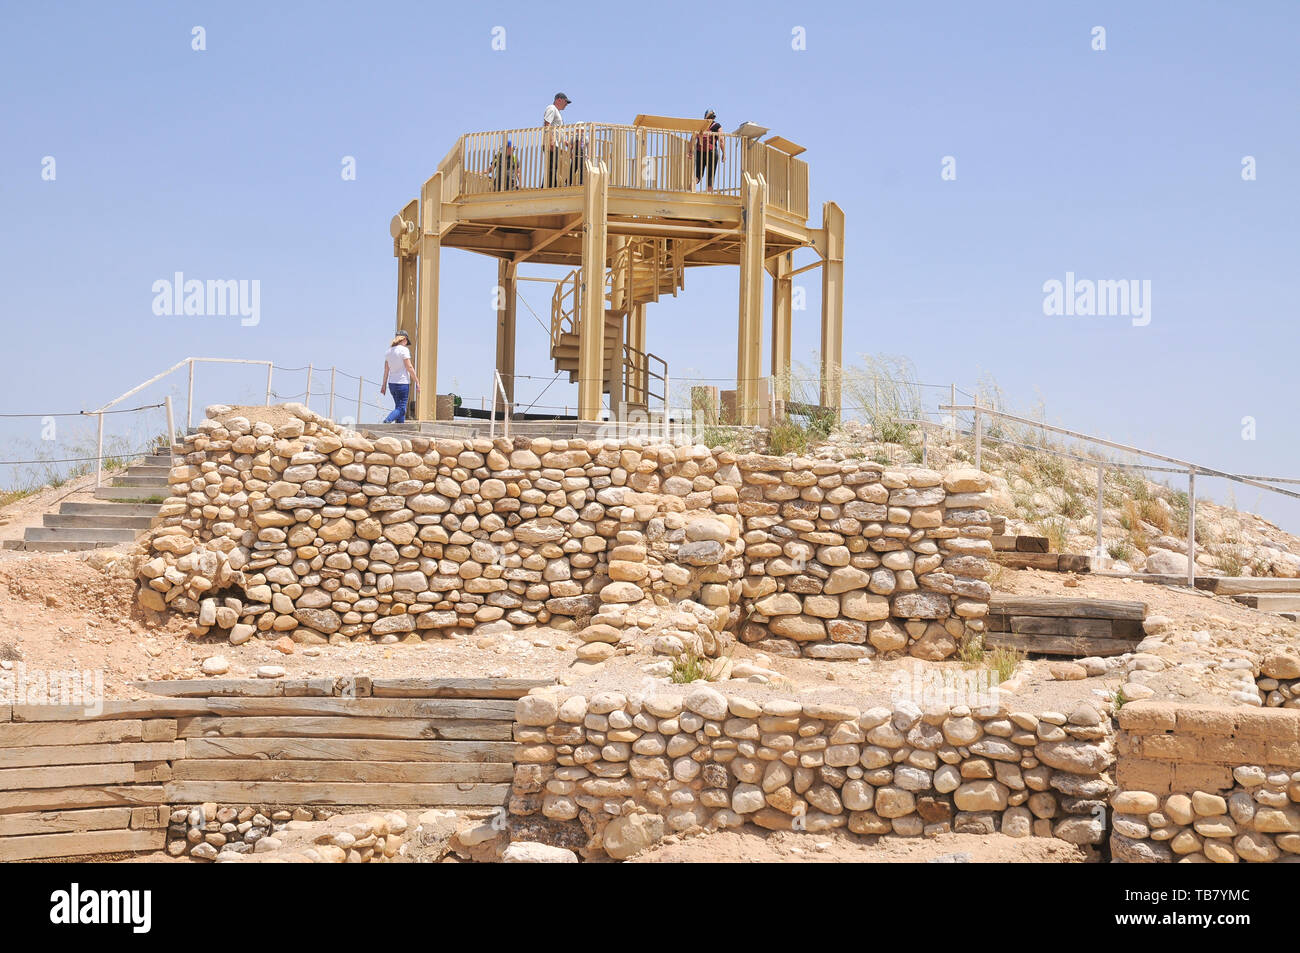 Israel, Negev, Tel Be'er Sheva believed to be the remains of the biblical town of Be'er Sheva. Observation tower Stock Photo